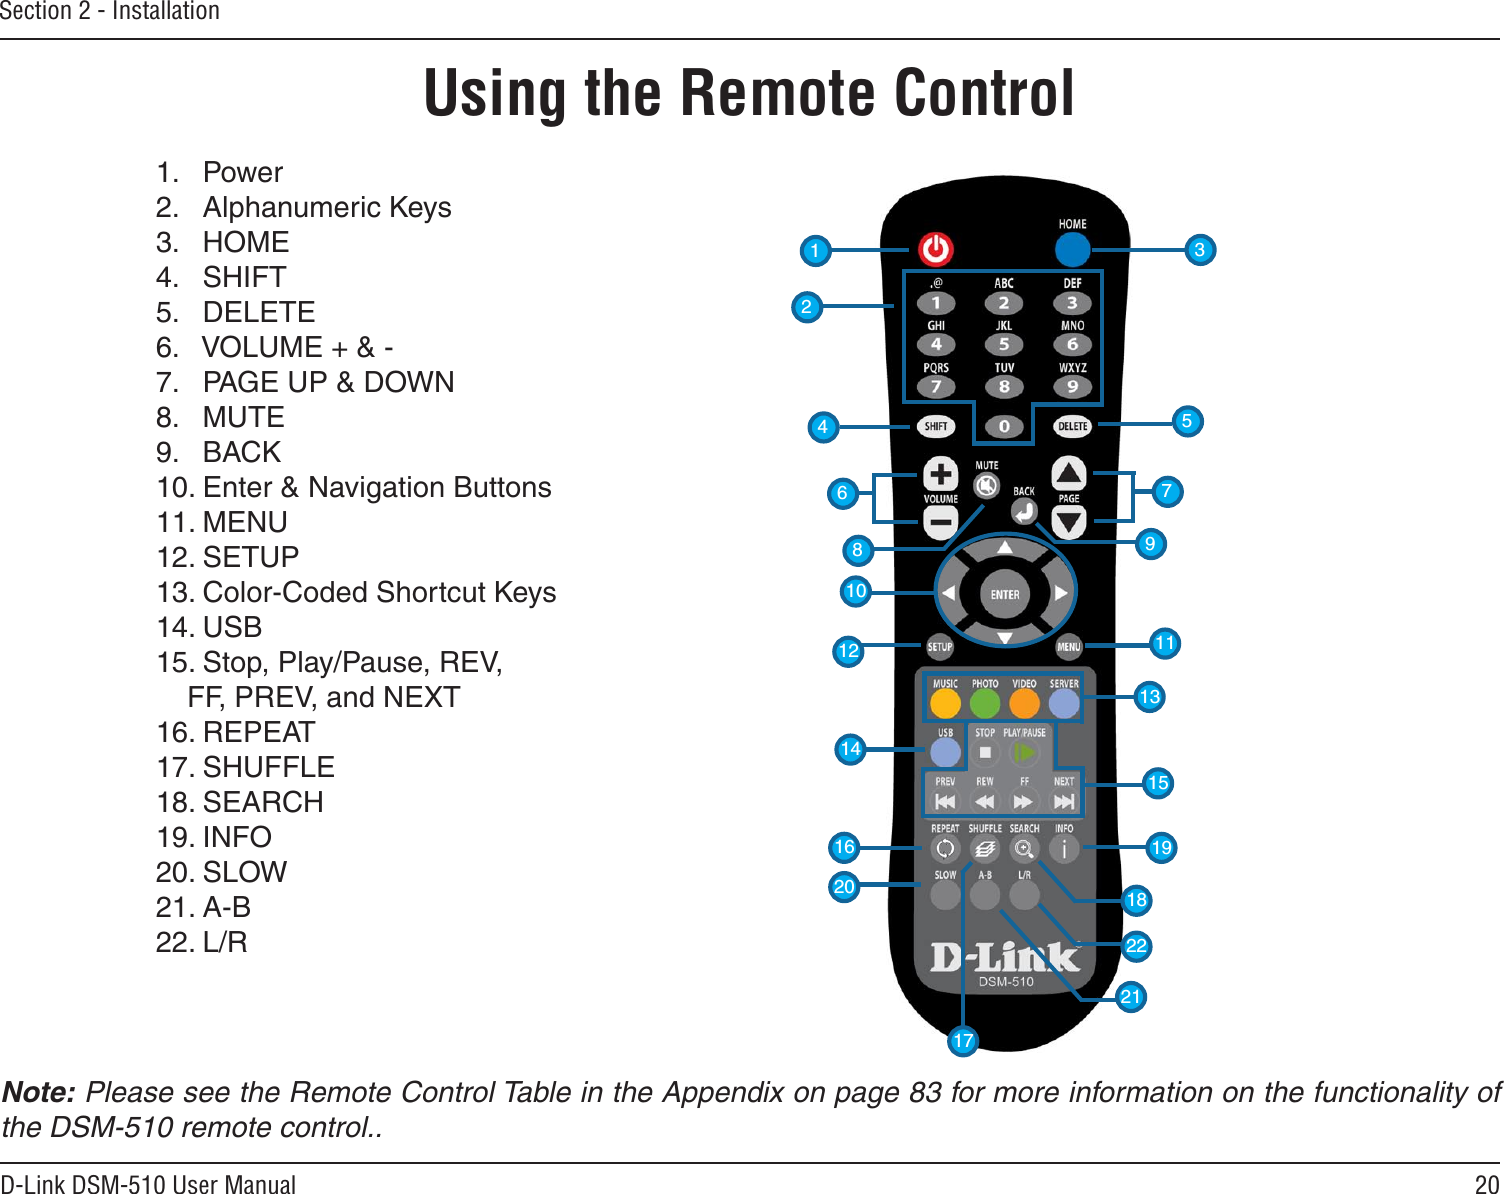 20D-Link DSM-510 User ManualSection 2 - InstallationUsing the Remote Control1.   Power2.   Alphanumeric Keys3.   HOME4.   SHIFT5.   DELETE6.   VOLUME + &amp; -7.   PAGE UP &amp; DOWN8.   MUTE9.   BACK10. Enter &amp; Navigation Buttons11. MENU12. SETUP13. Color-Coded Shortcut Keys14. USB15. Stop, Play/Pause, REV,  FF, PREV, and NEXT16. REPEAT17. SHUFFLE18. SEARCH19. INFO20. SLOW21. A-B22. L/R13248567911101213141516171819202221Note: Please see the Remote Control Table in the Appendix on page 83 for more information on the functionality of the DSM-510 remote control.. 